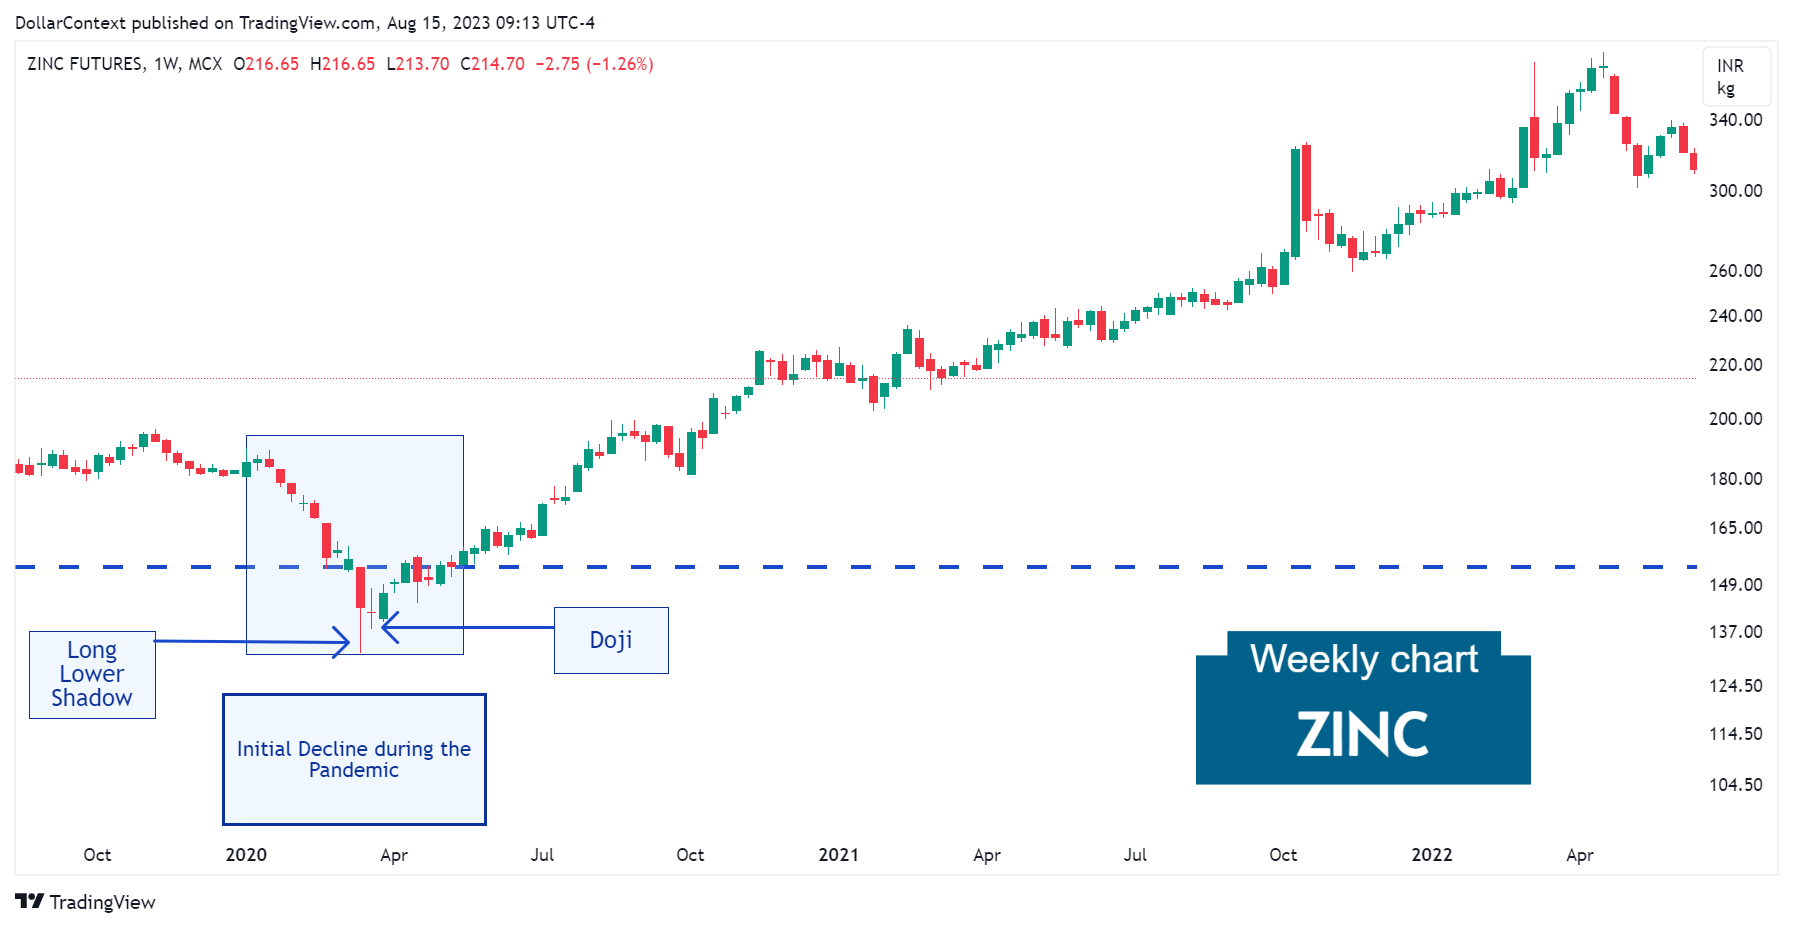 Zinc Futures: Long Lower Shadow and Doji in March 2020